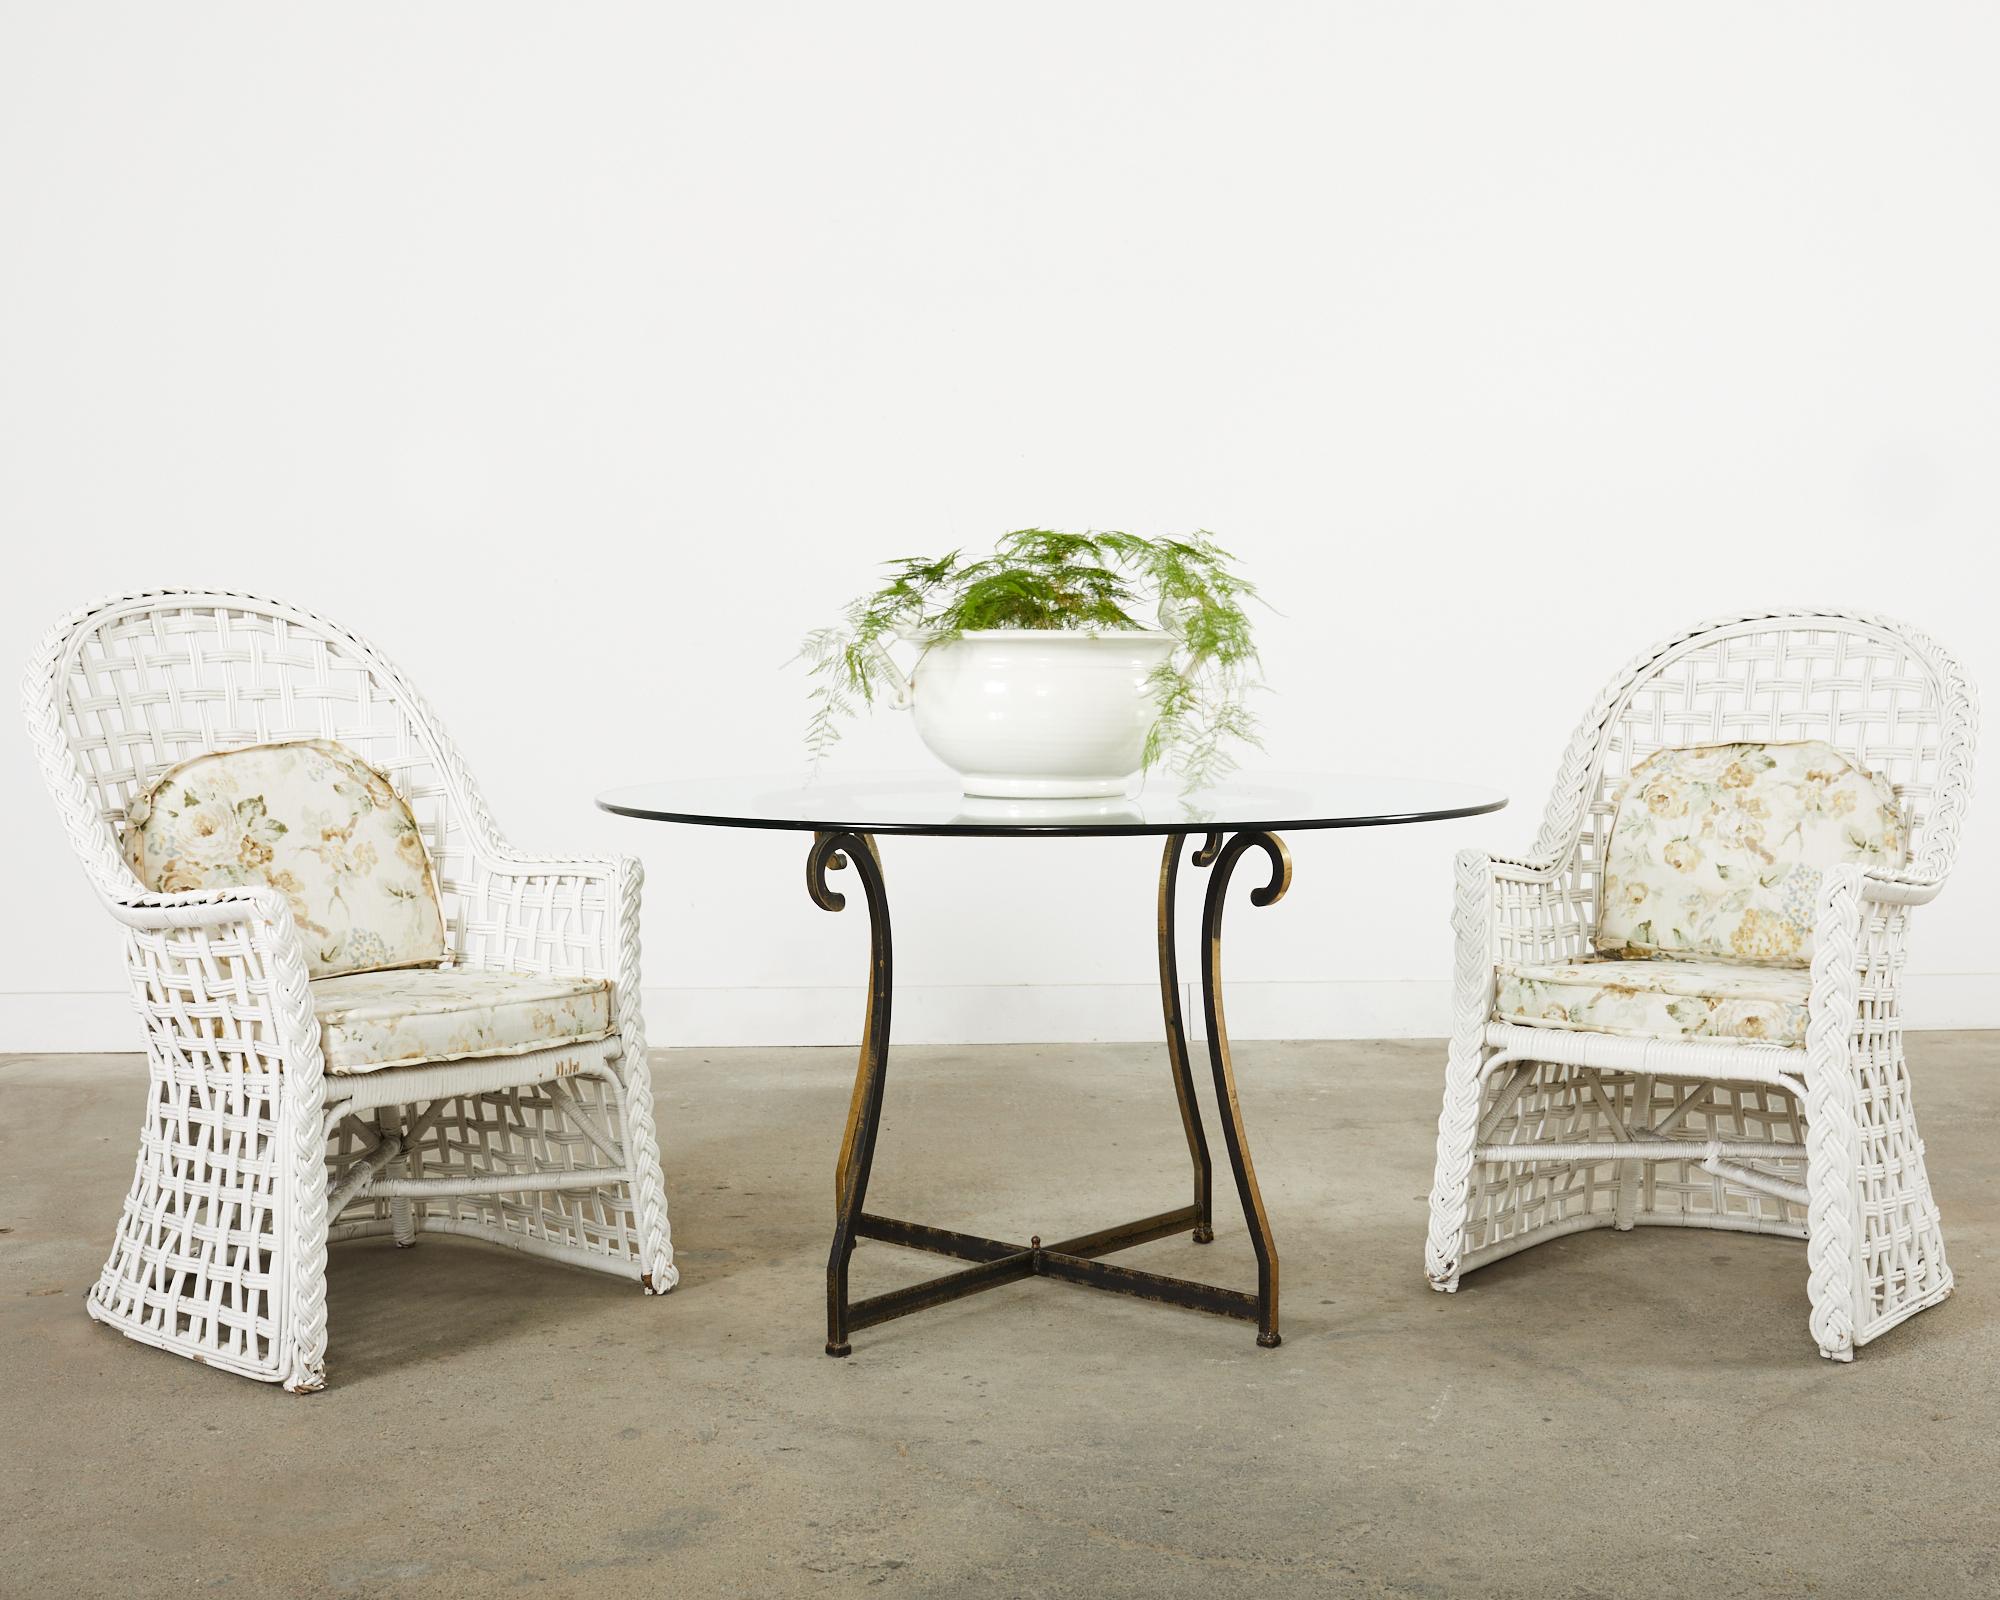 Mid-century modern set of six rattan garden dining armchairs made in the California coastal organic modern style featuring a vintage painted finish. Beautifully crafted with large high back rattan frames decorated with pencil reed lattice wicker in